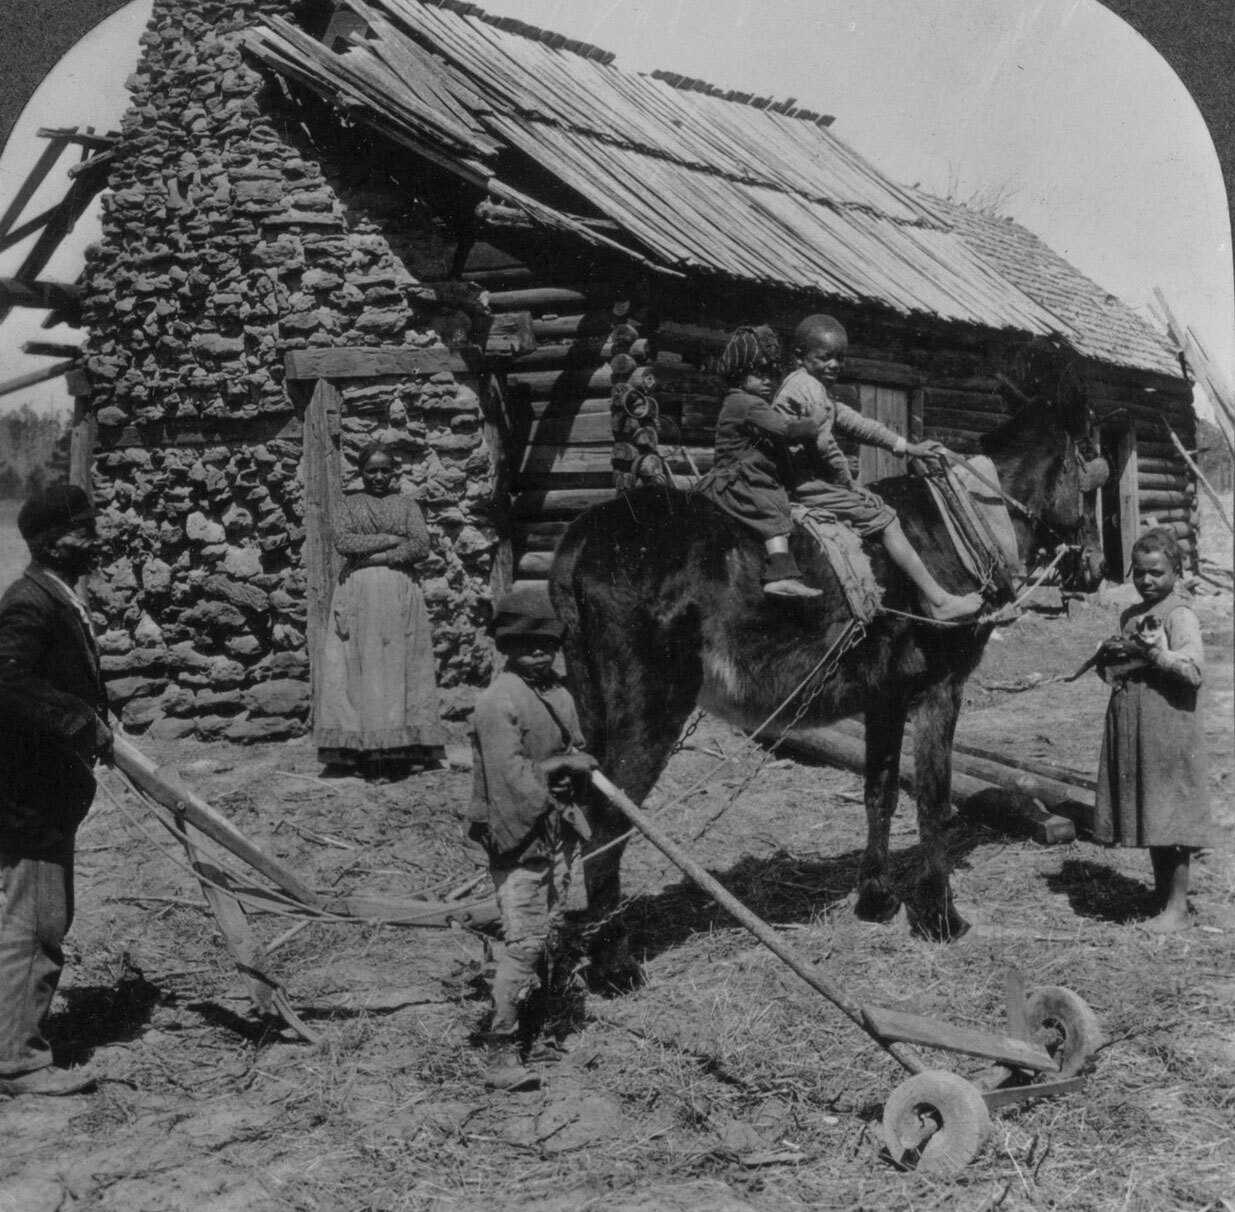 Black and white stereograph of a family in front of a log house.